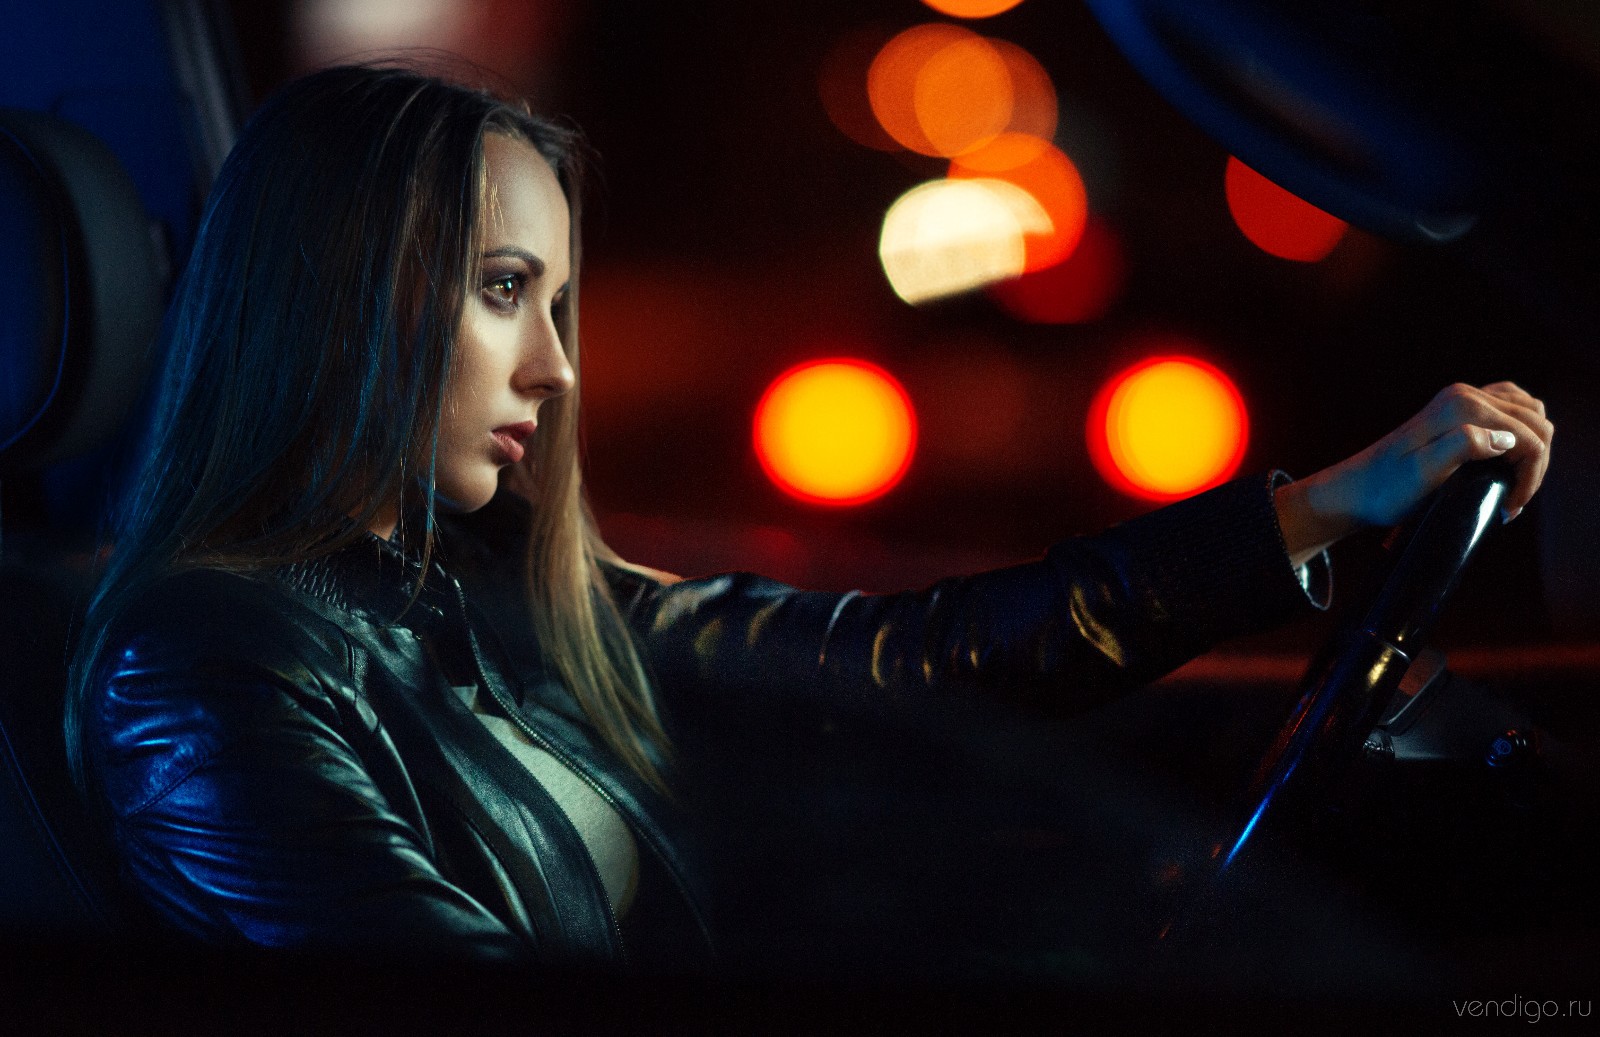 Evgeny Bulatov Women Model Brunette Inside A Car Driving Women With Cars Leather Jackets Looking Int 1600x1037